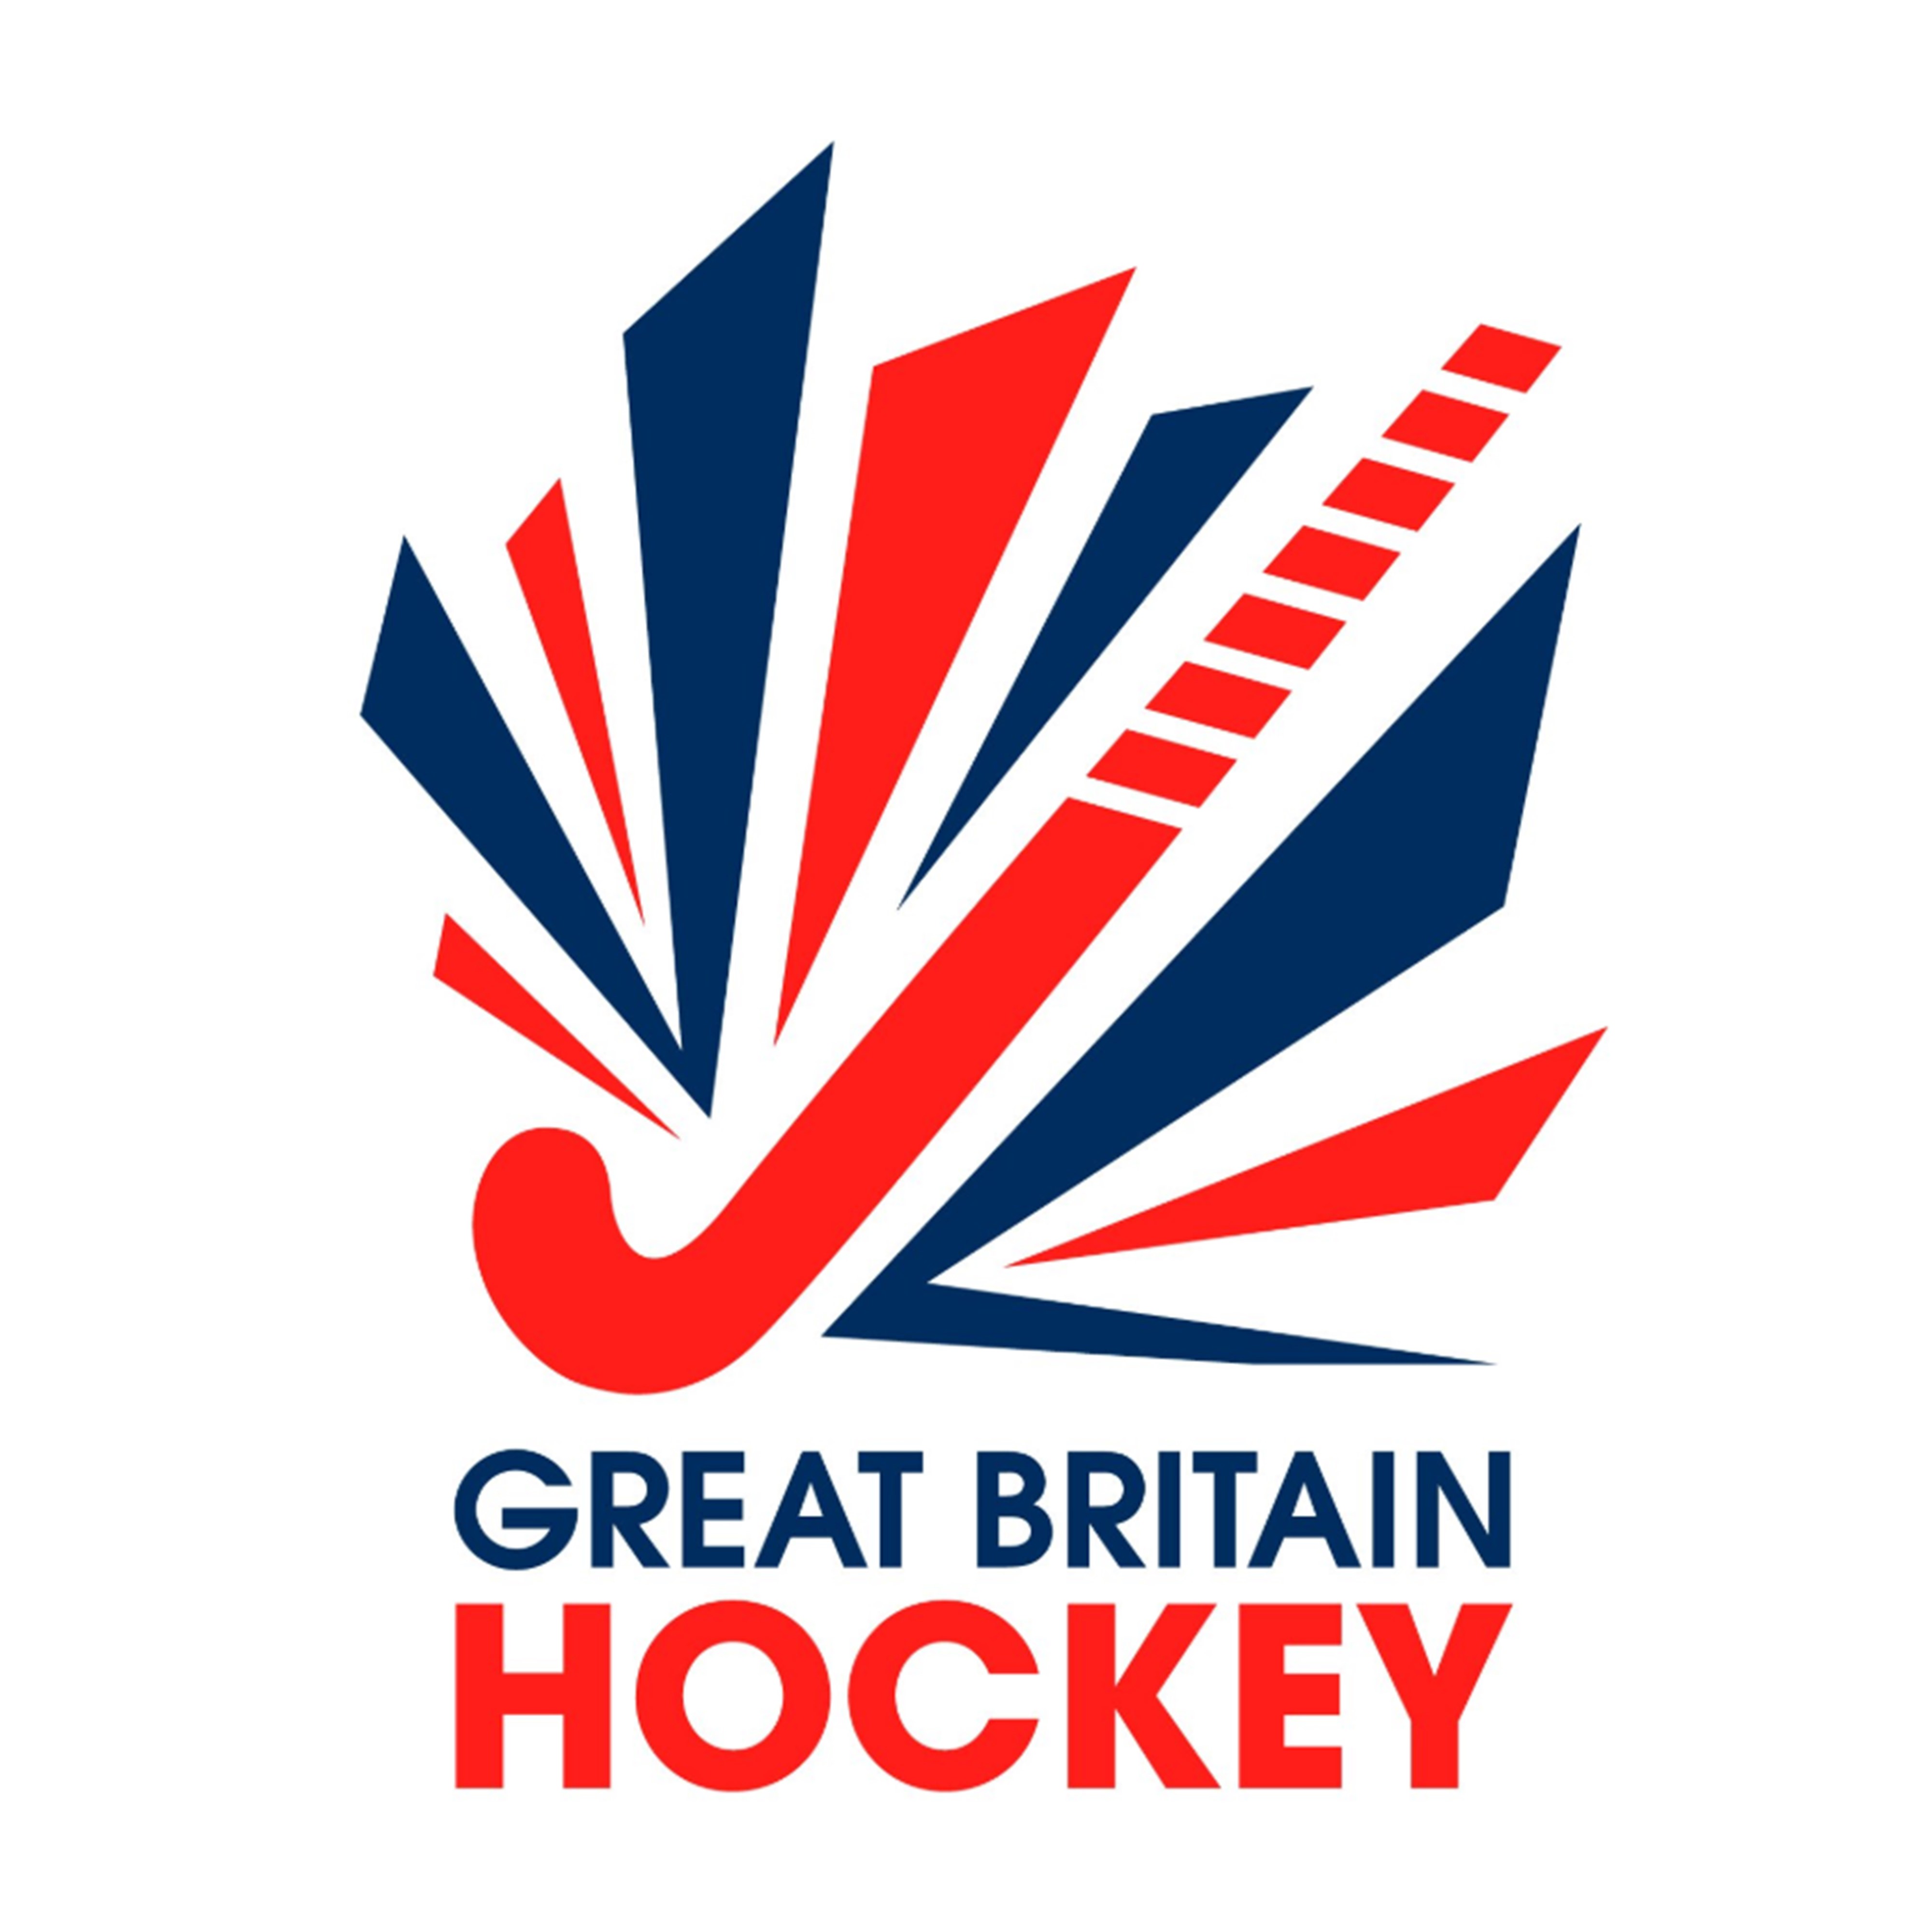 GB Hockey's Elite Development Programme aims to produce Olympic-level players.